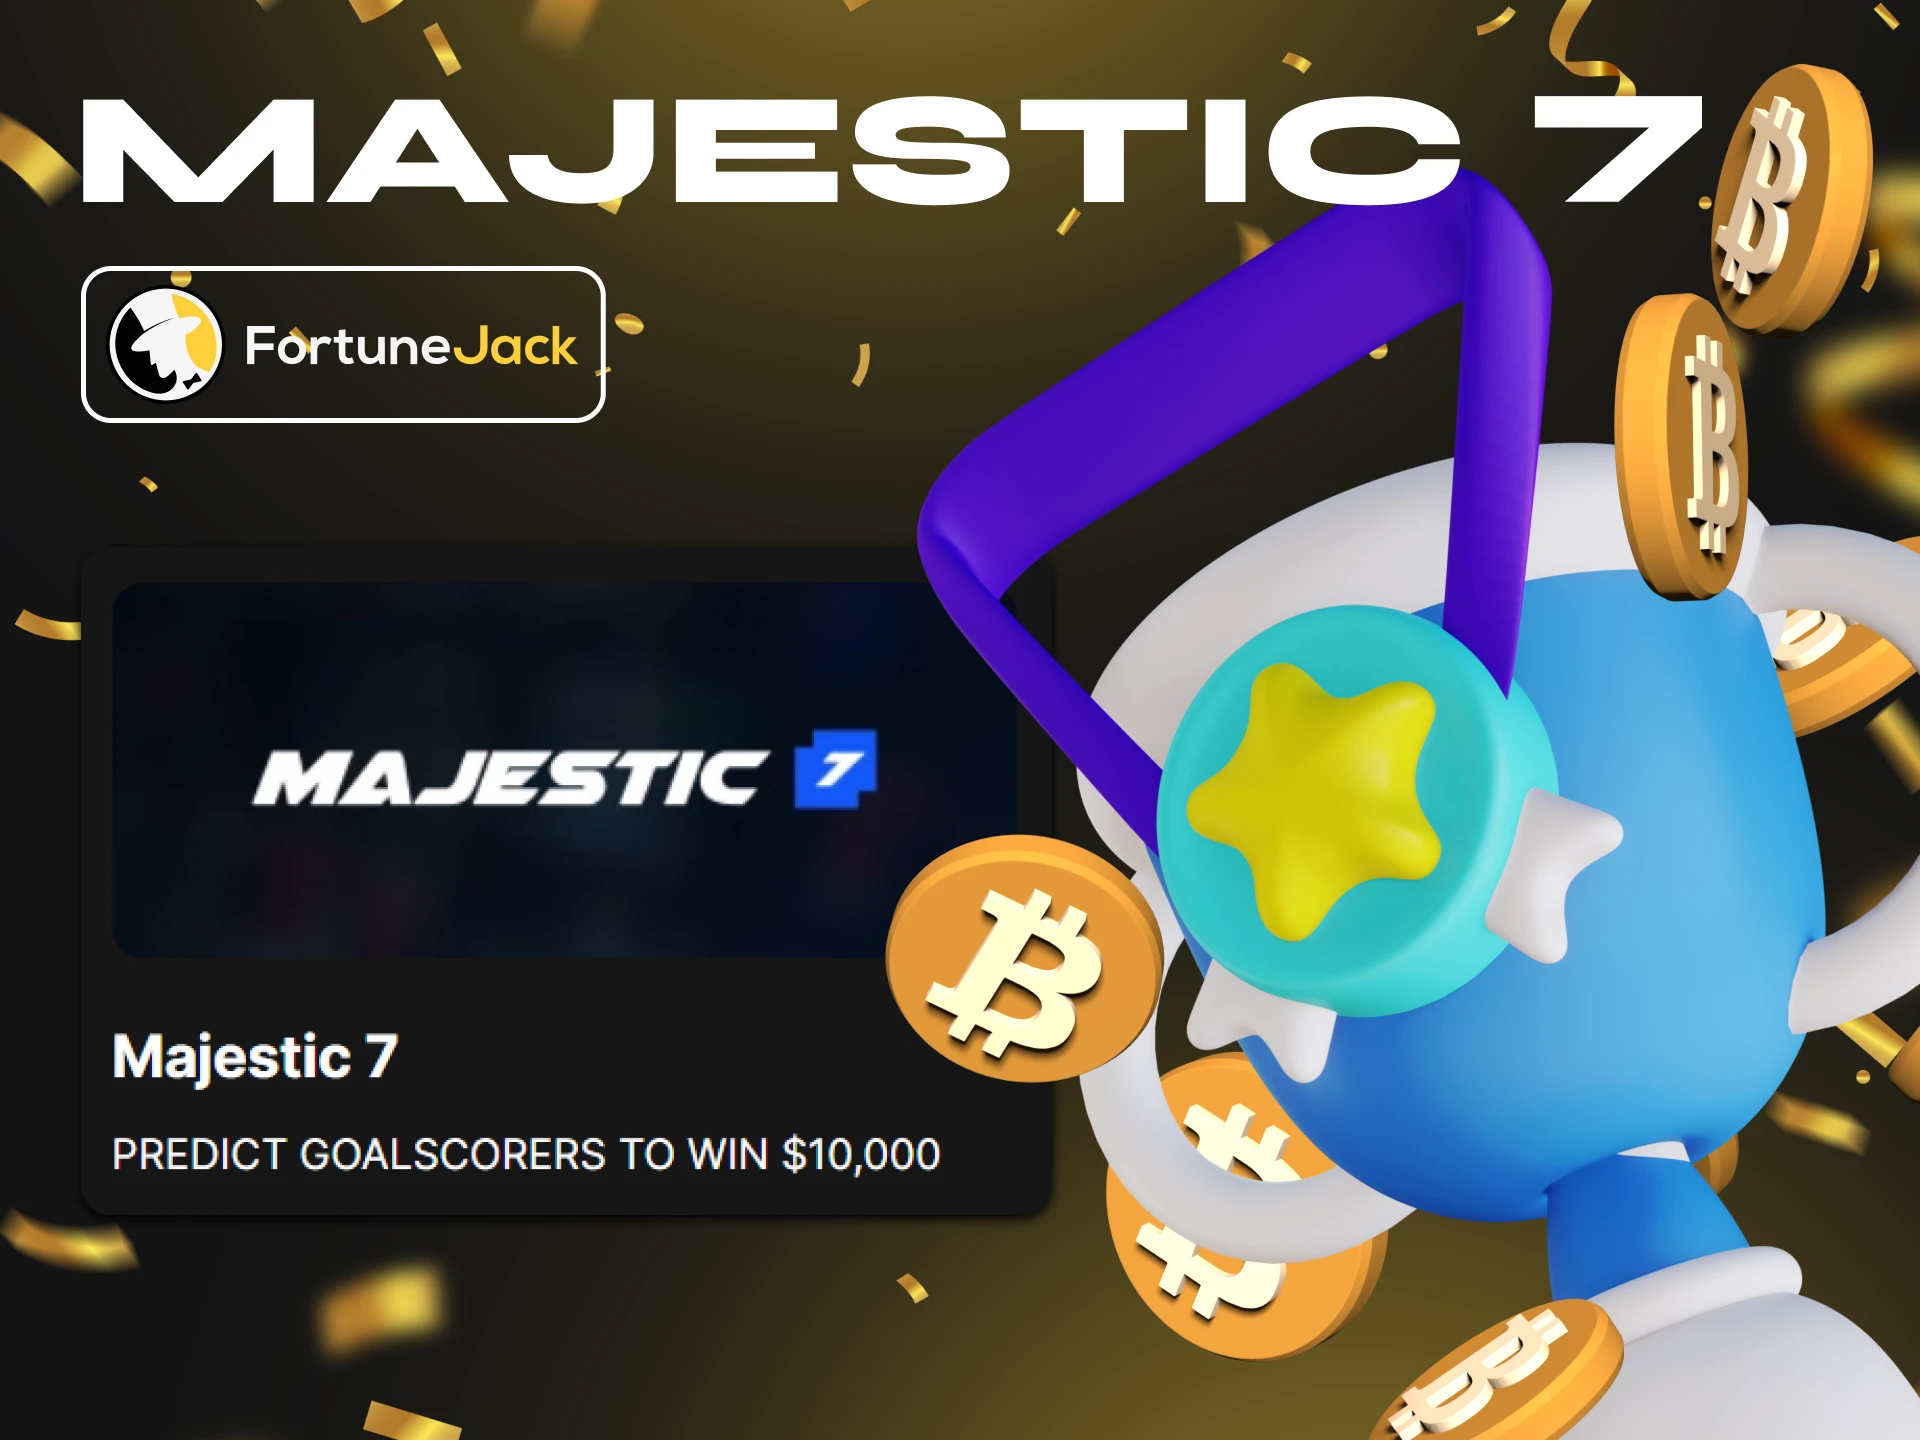 At FortuneJack Casino you can get big bonuses for a successful prediction.